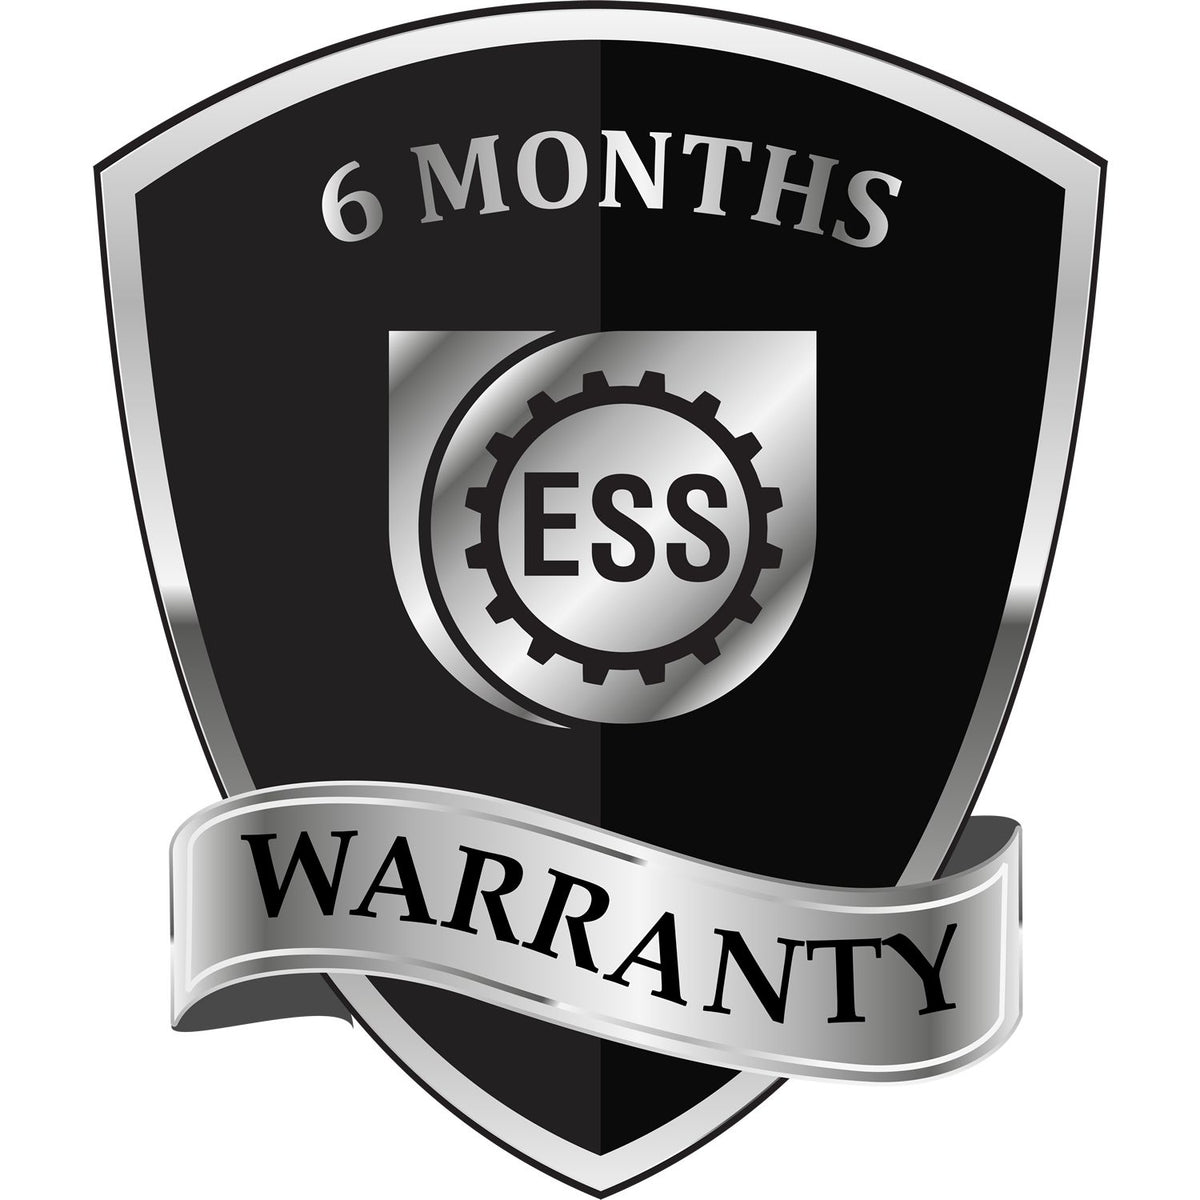 A badge or emblem showing a warranty icon for the Heavy-Duty Vermont Rectangular Notary Stamp